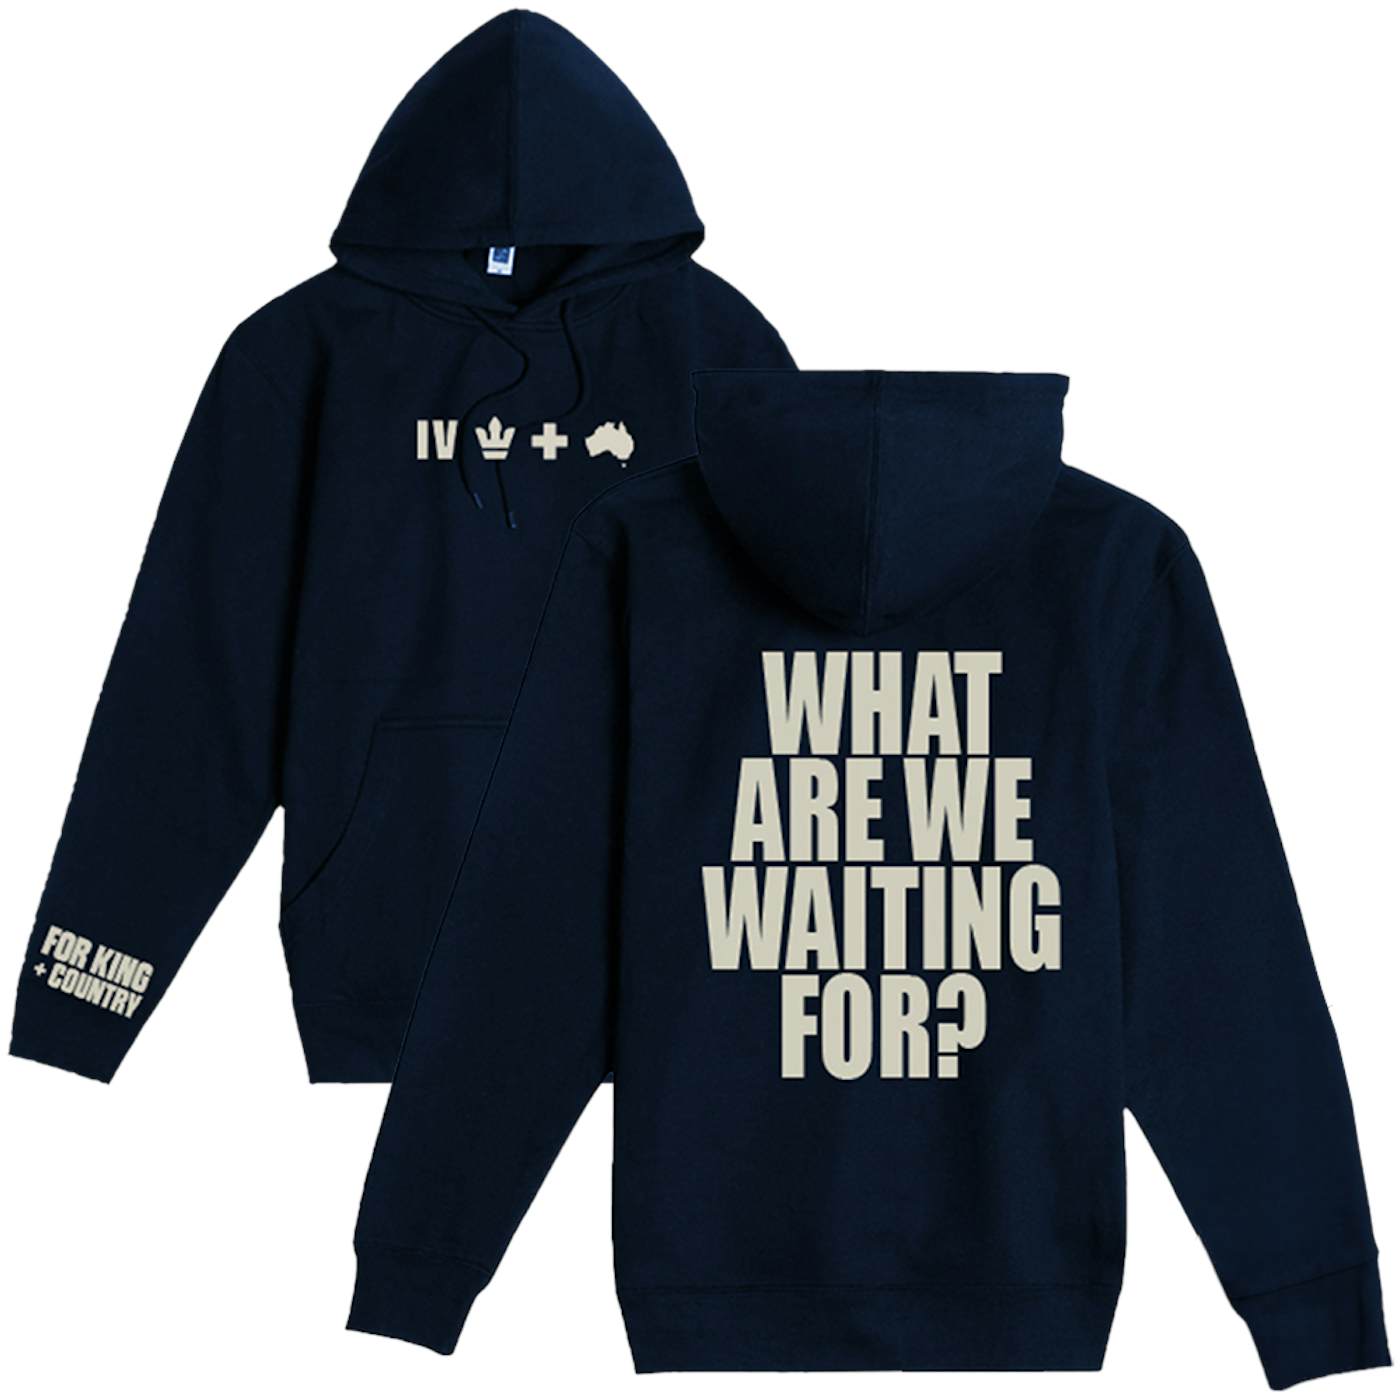 for KING & COUNTRY What Are We Waiting For? Hoodie - Navy